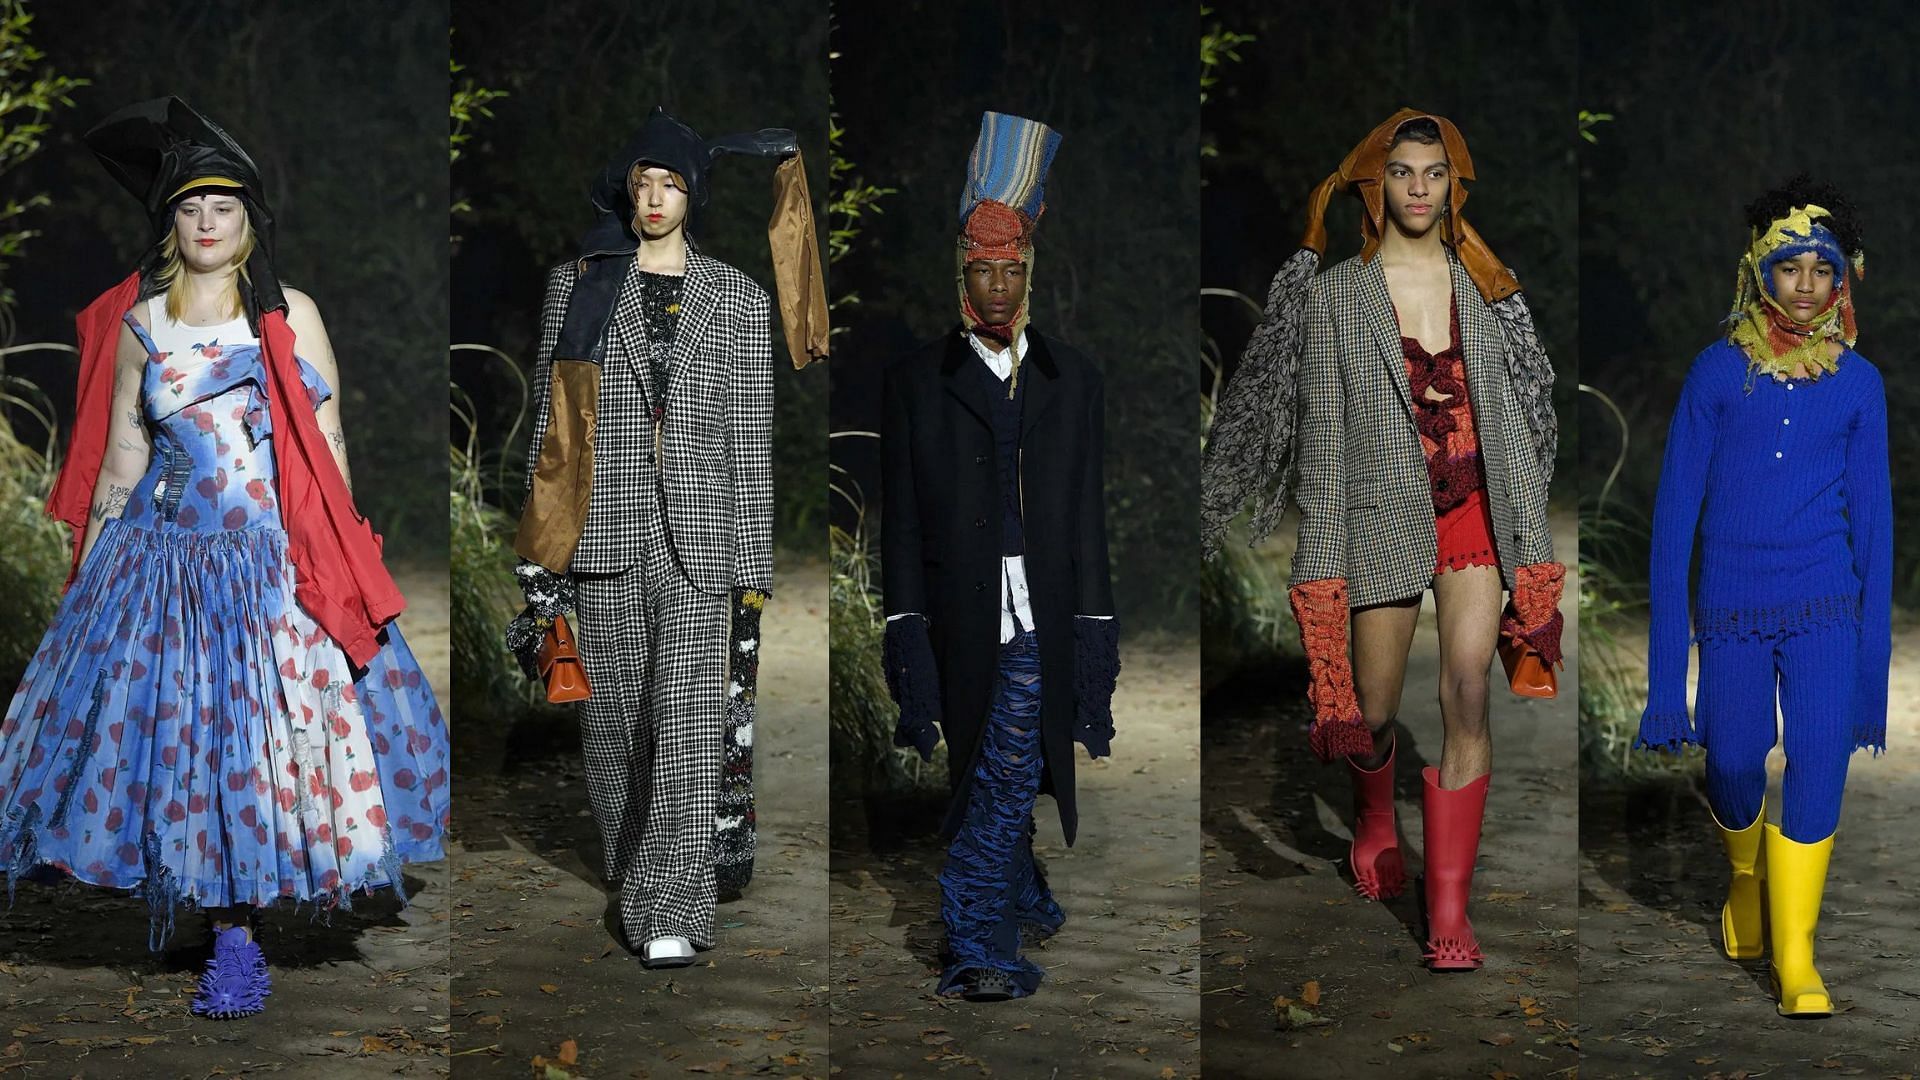 Marni recently unveiled its Fall Winter 2022 collection during the Milan Fashion Week (Image via Marni)